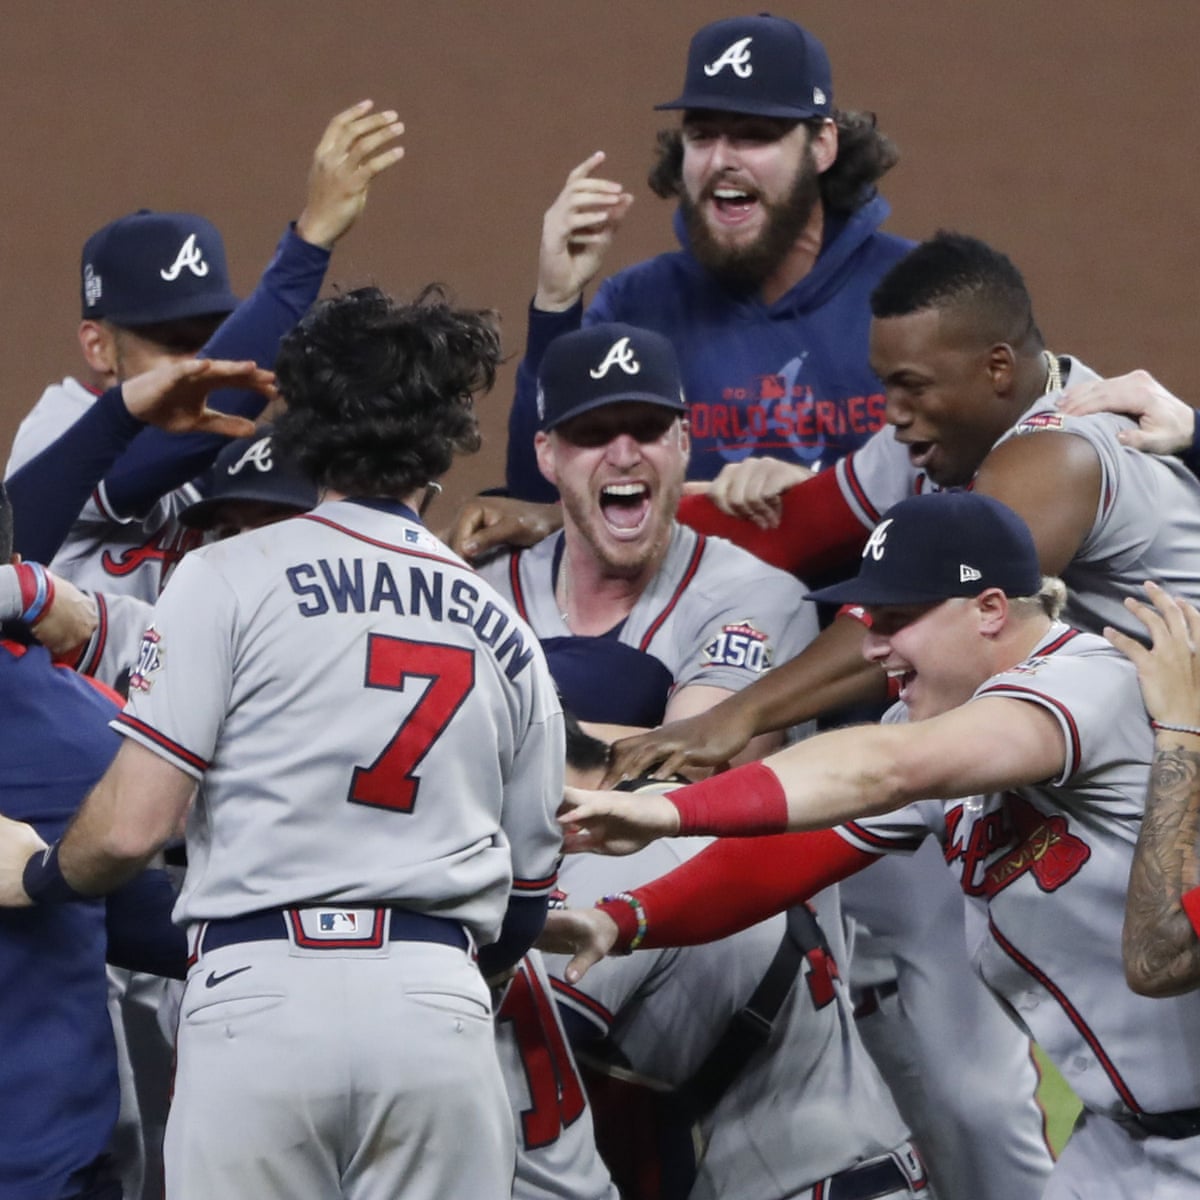 The Atlanta Braves' World Series victory was built on a summer of